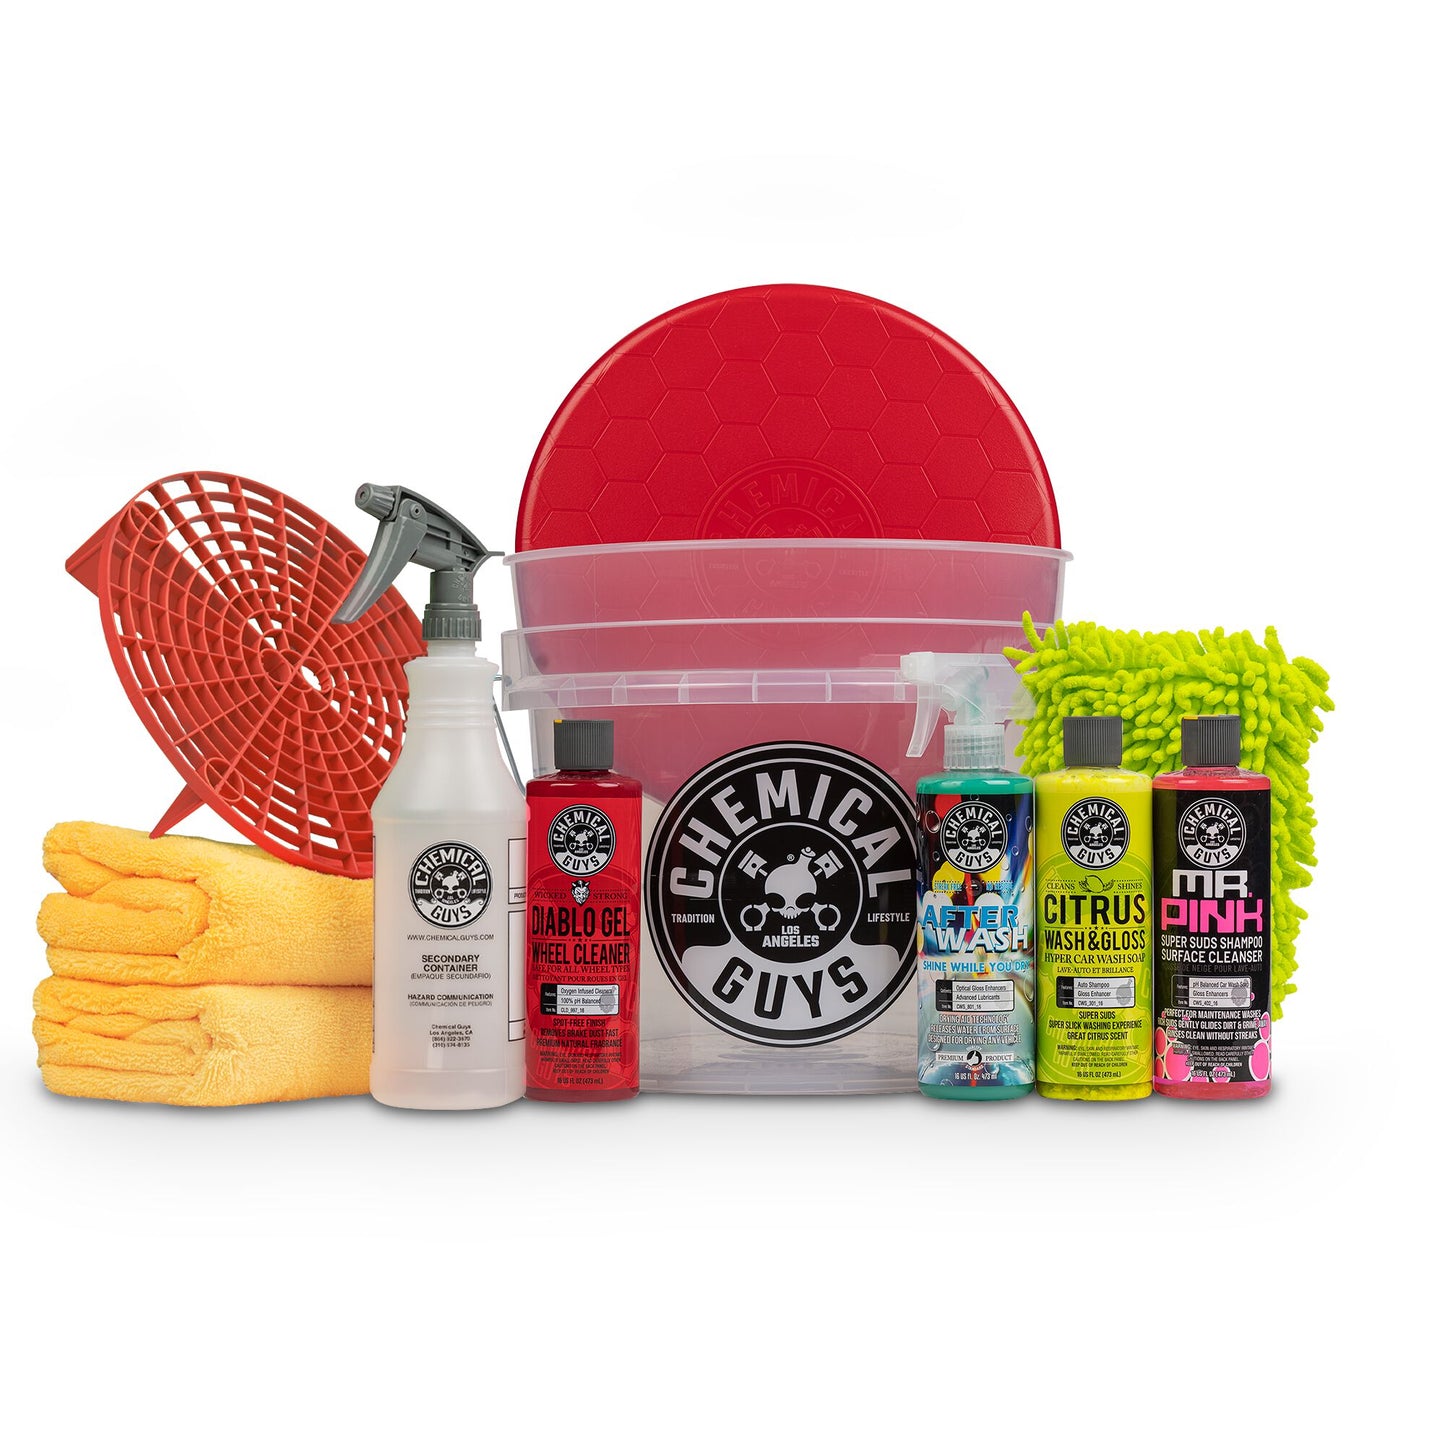 Car Cleaning Kit - Our Best Car Wash Bucket Kit